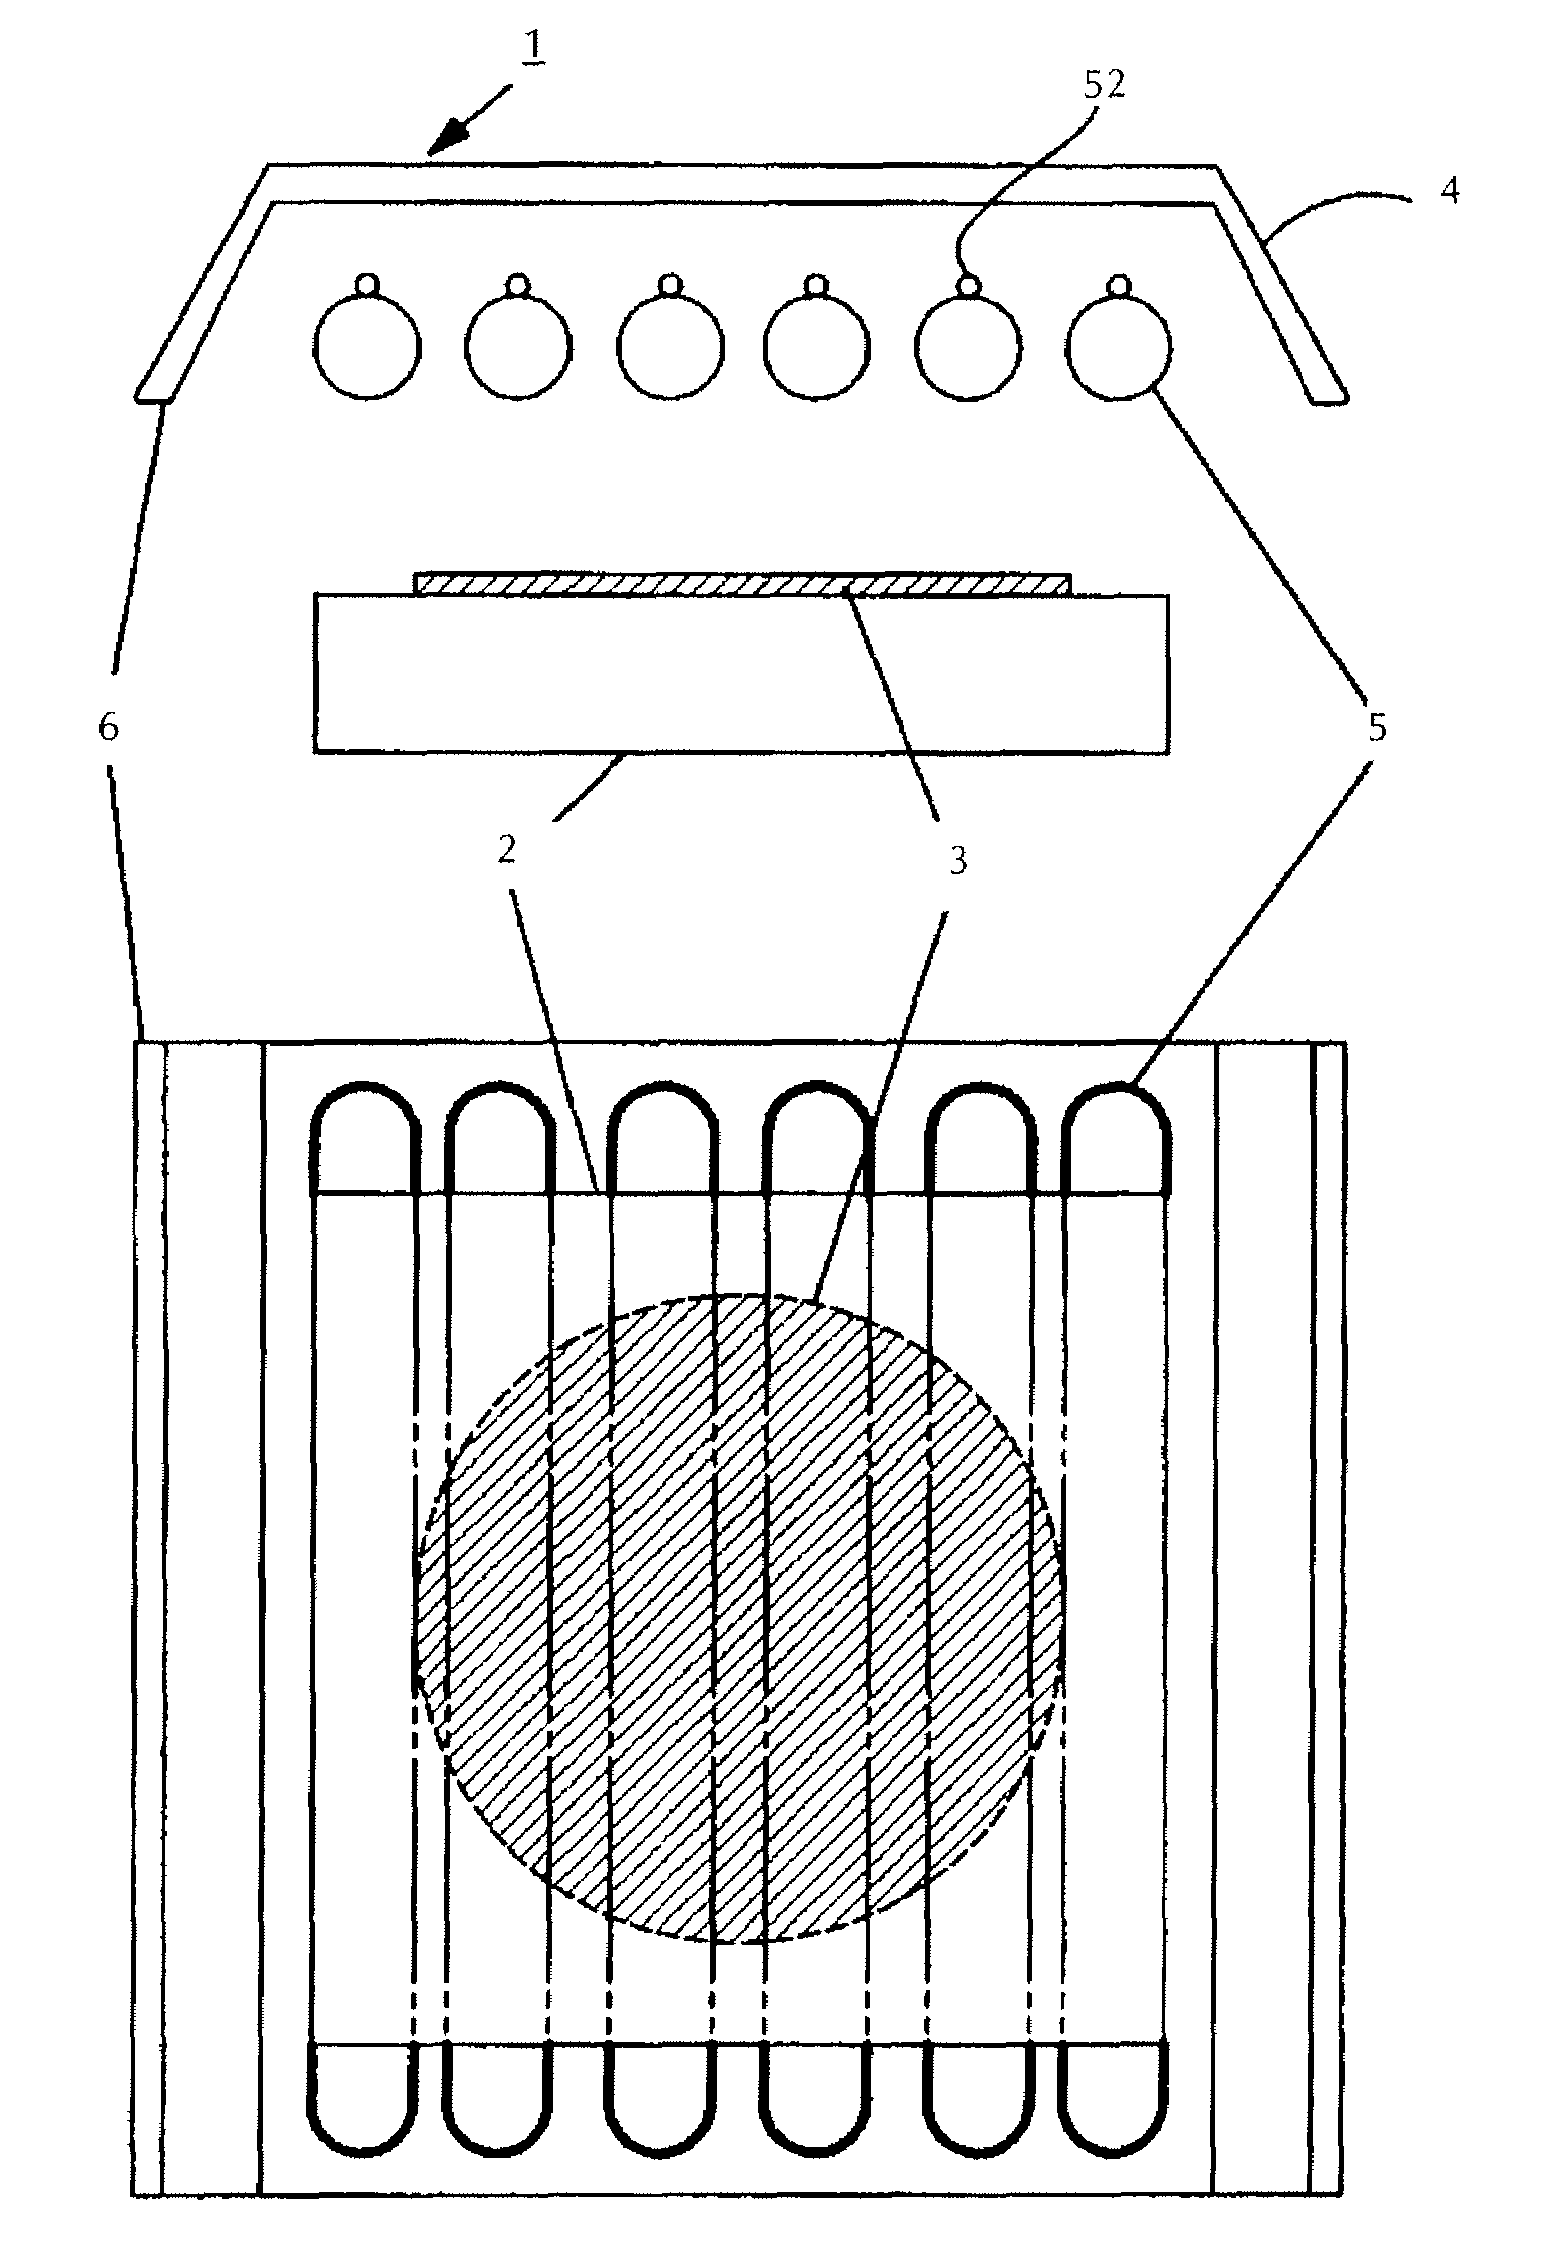 Substrate heating device and substrate heating method